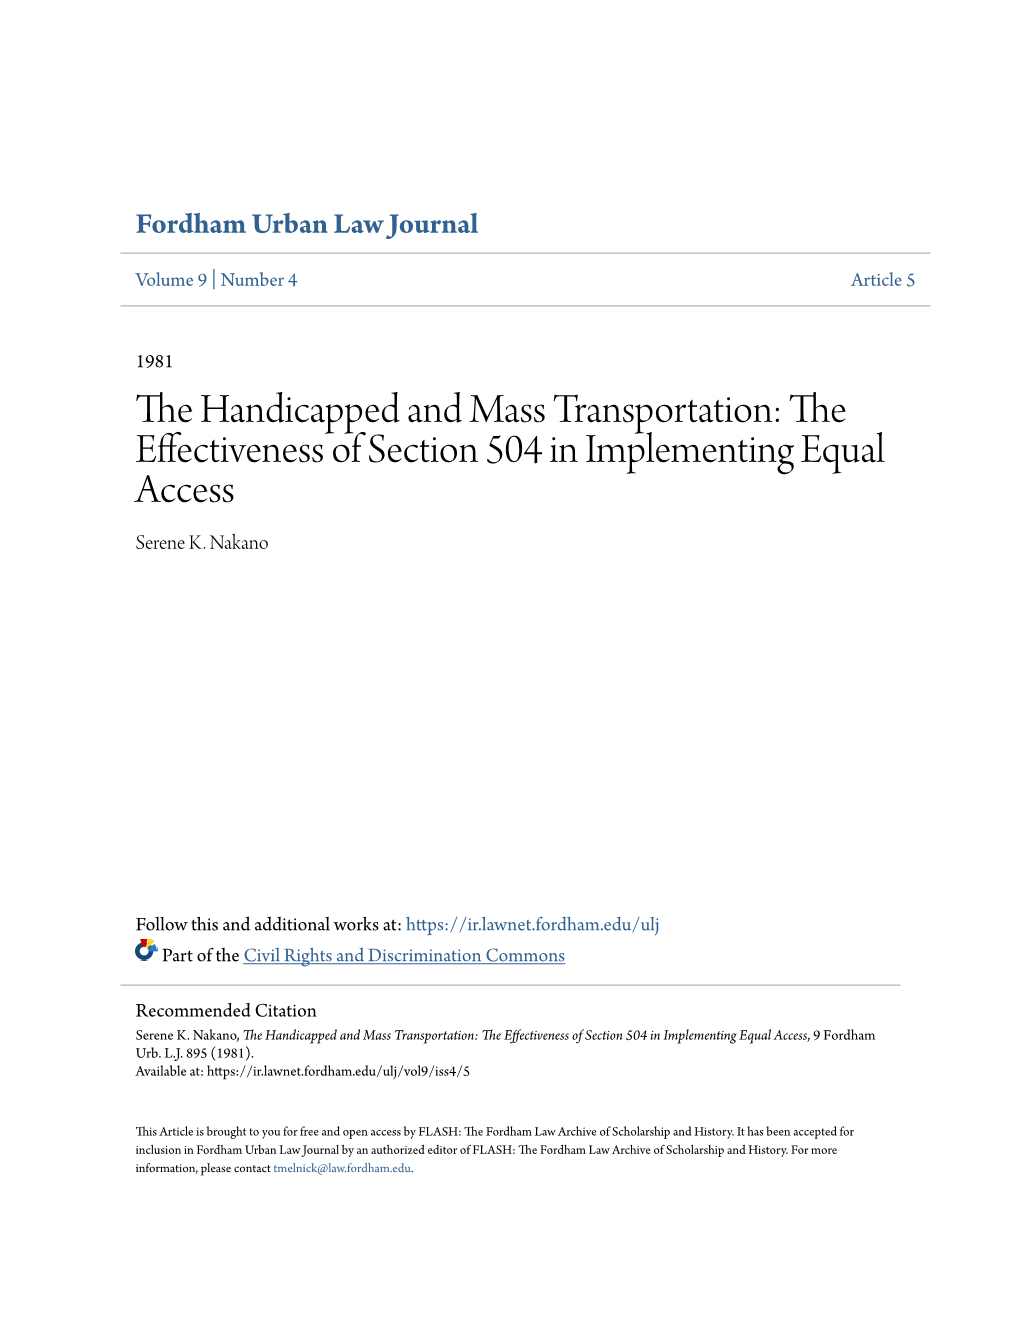 The Handicapped and Mass Transportation: the Effectiveness of Section 504 in Implementing Equal Access, 9 Fordham Urb